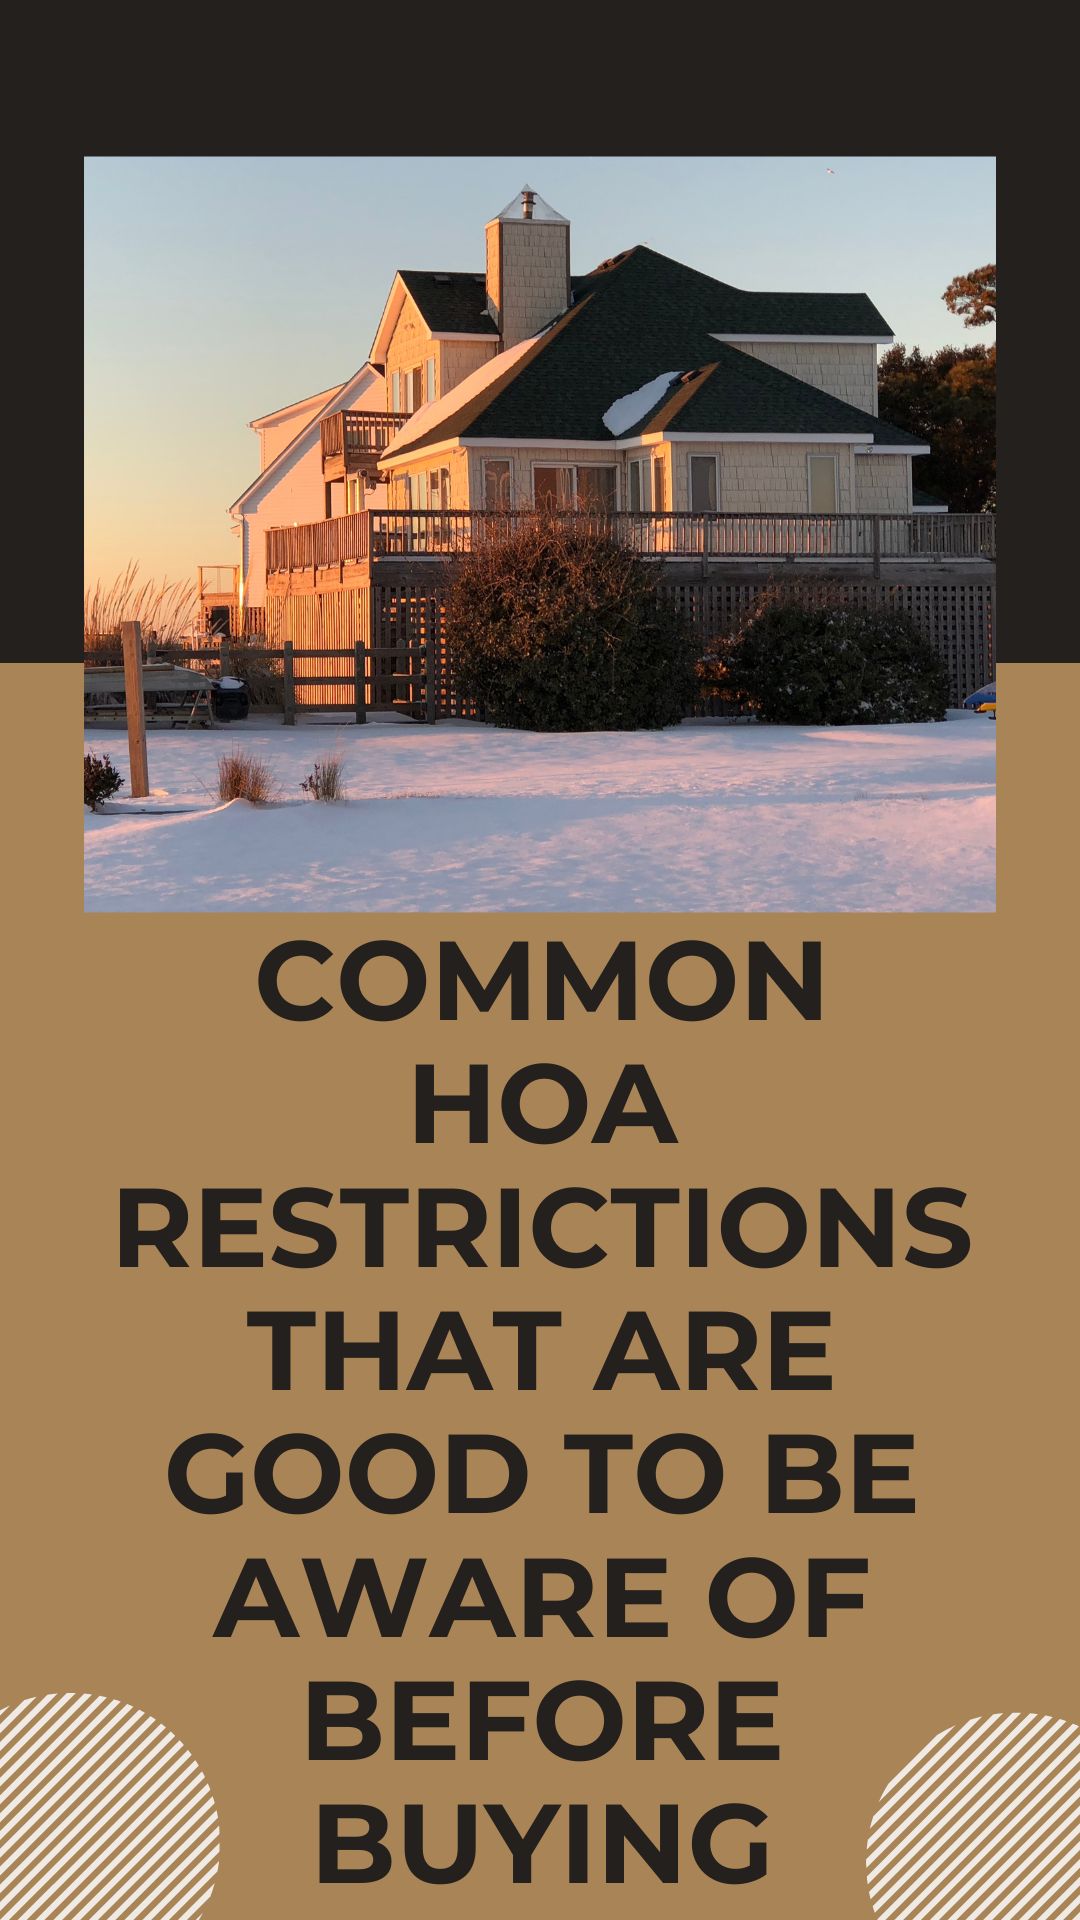 Common HOA Restrictions That Are Good to Be Aware of Before Buying